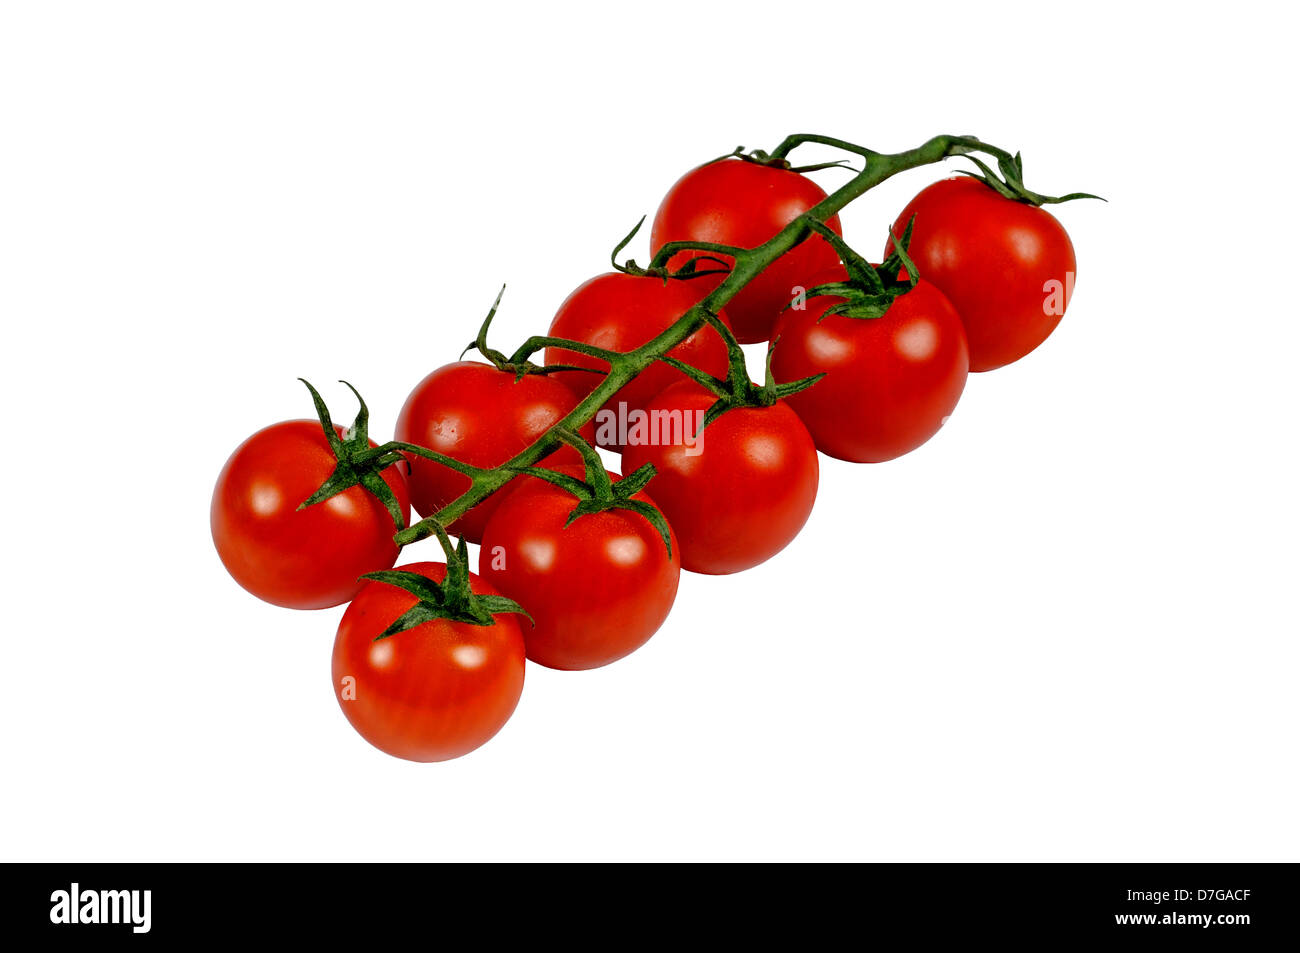 Cherry tomatoes on the vine against a white background. Stock Photo